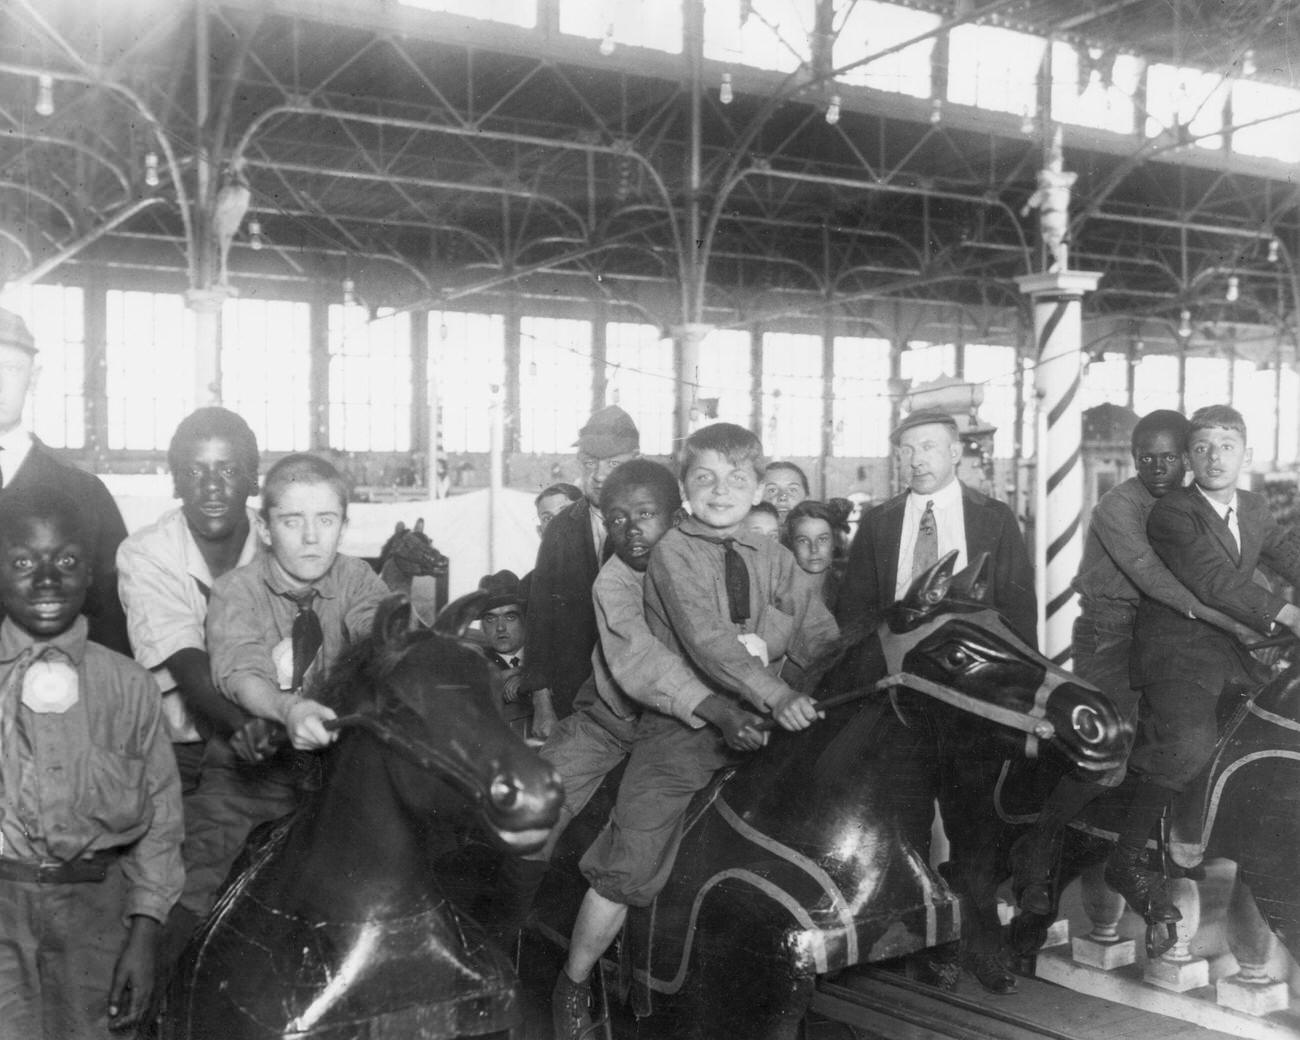 Diverse Boys On Horse Ride At Steeplechase Park, Coney Island, 1910